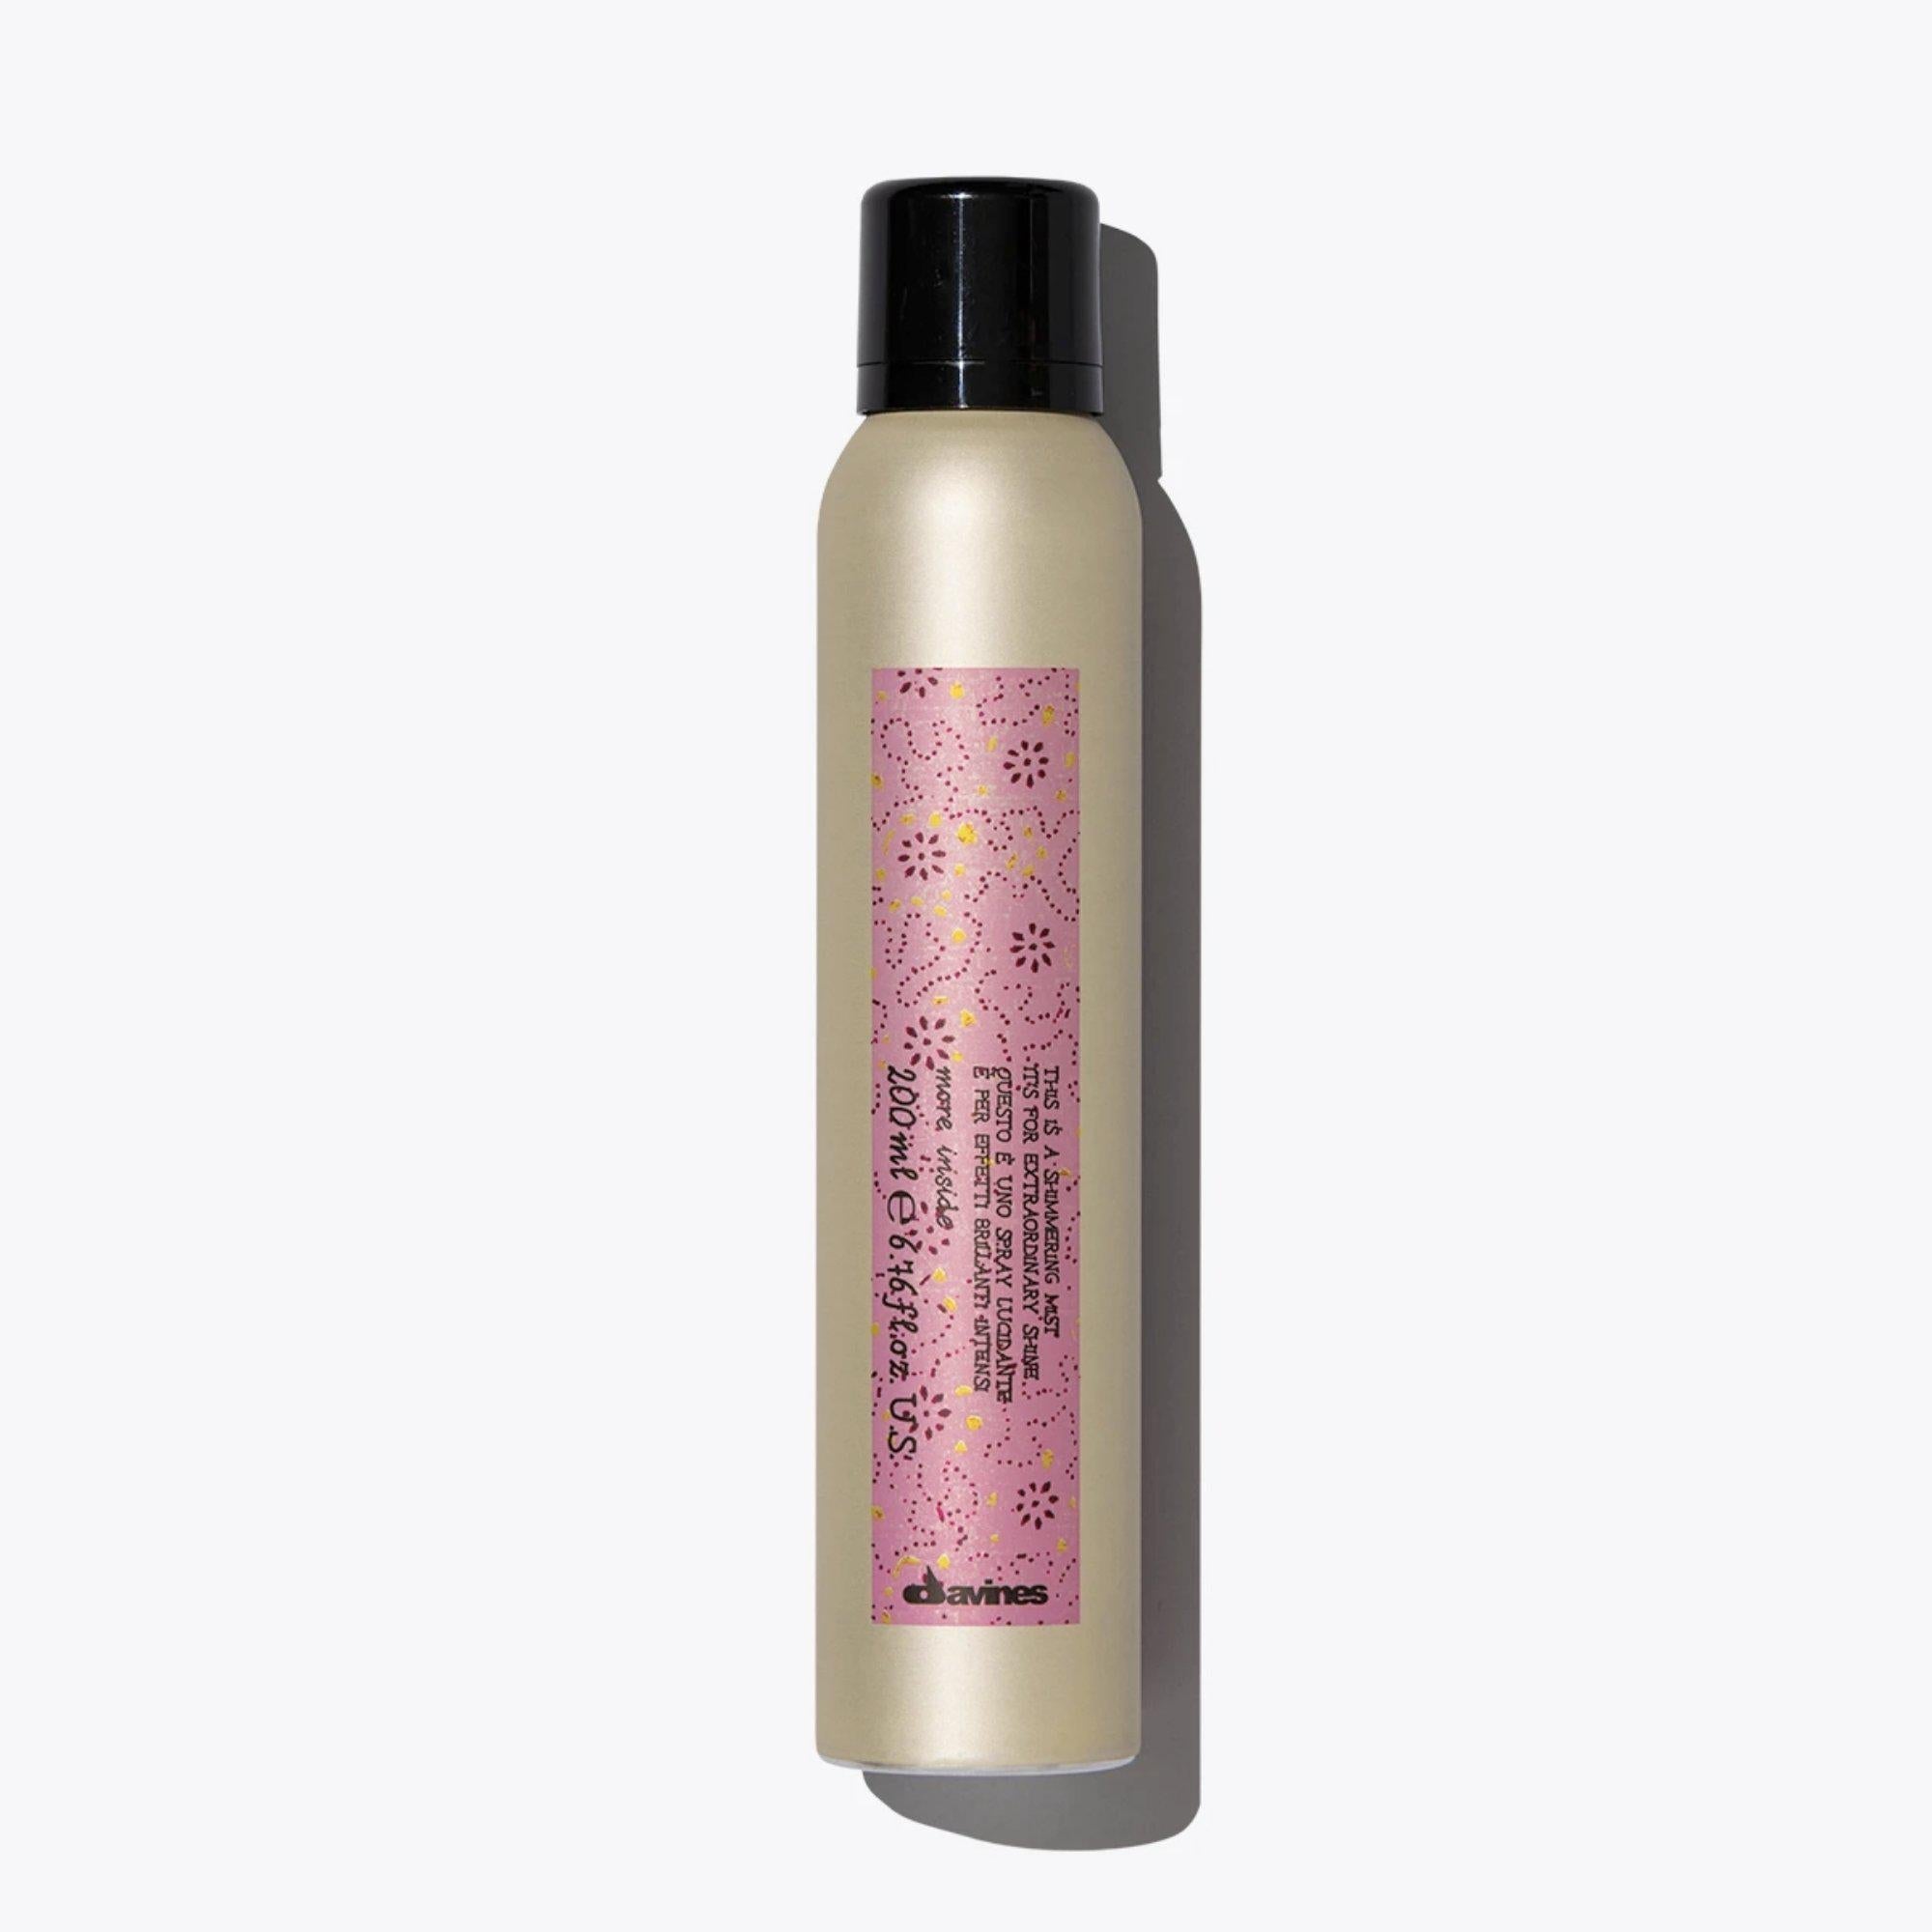 Davines This Is A Shimmering Mist 200ml